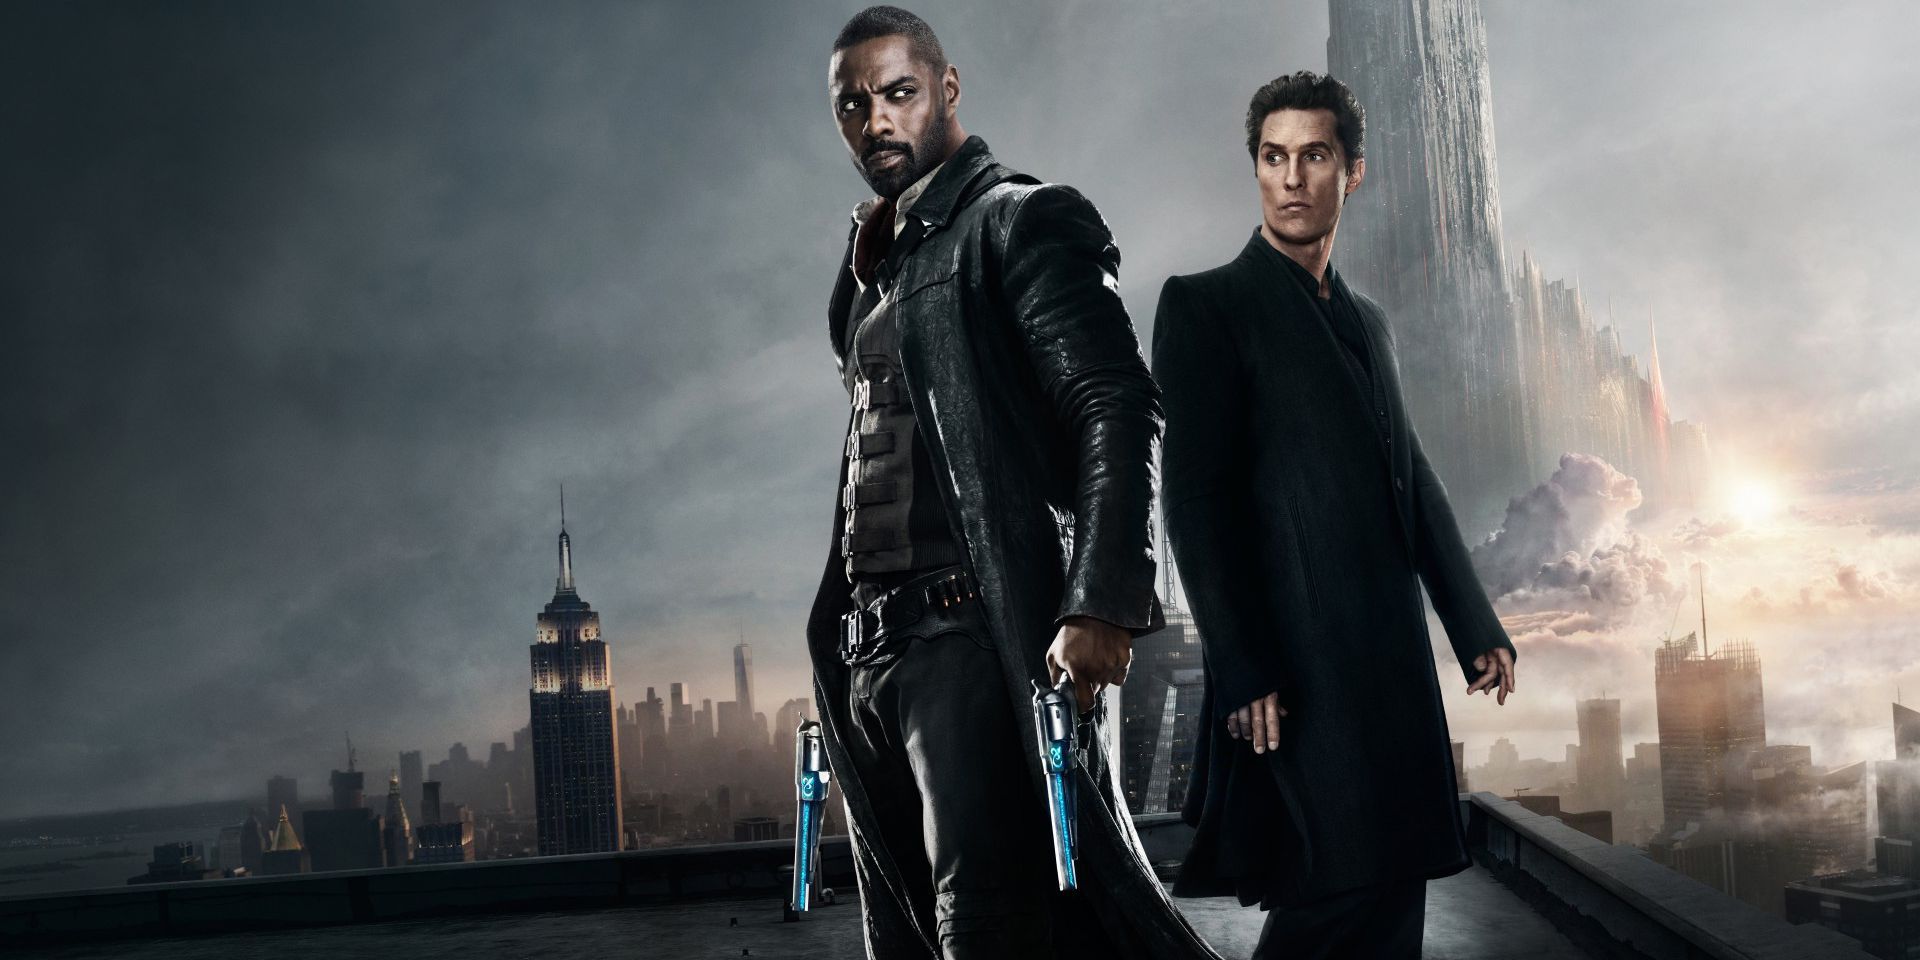 2017 adaptation of Stephen King's The Dark Tower